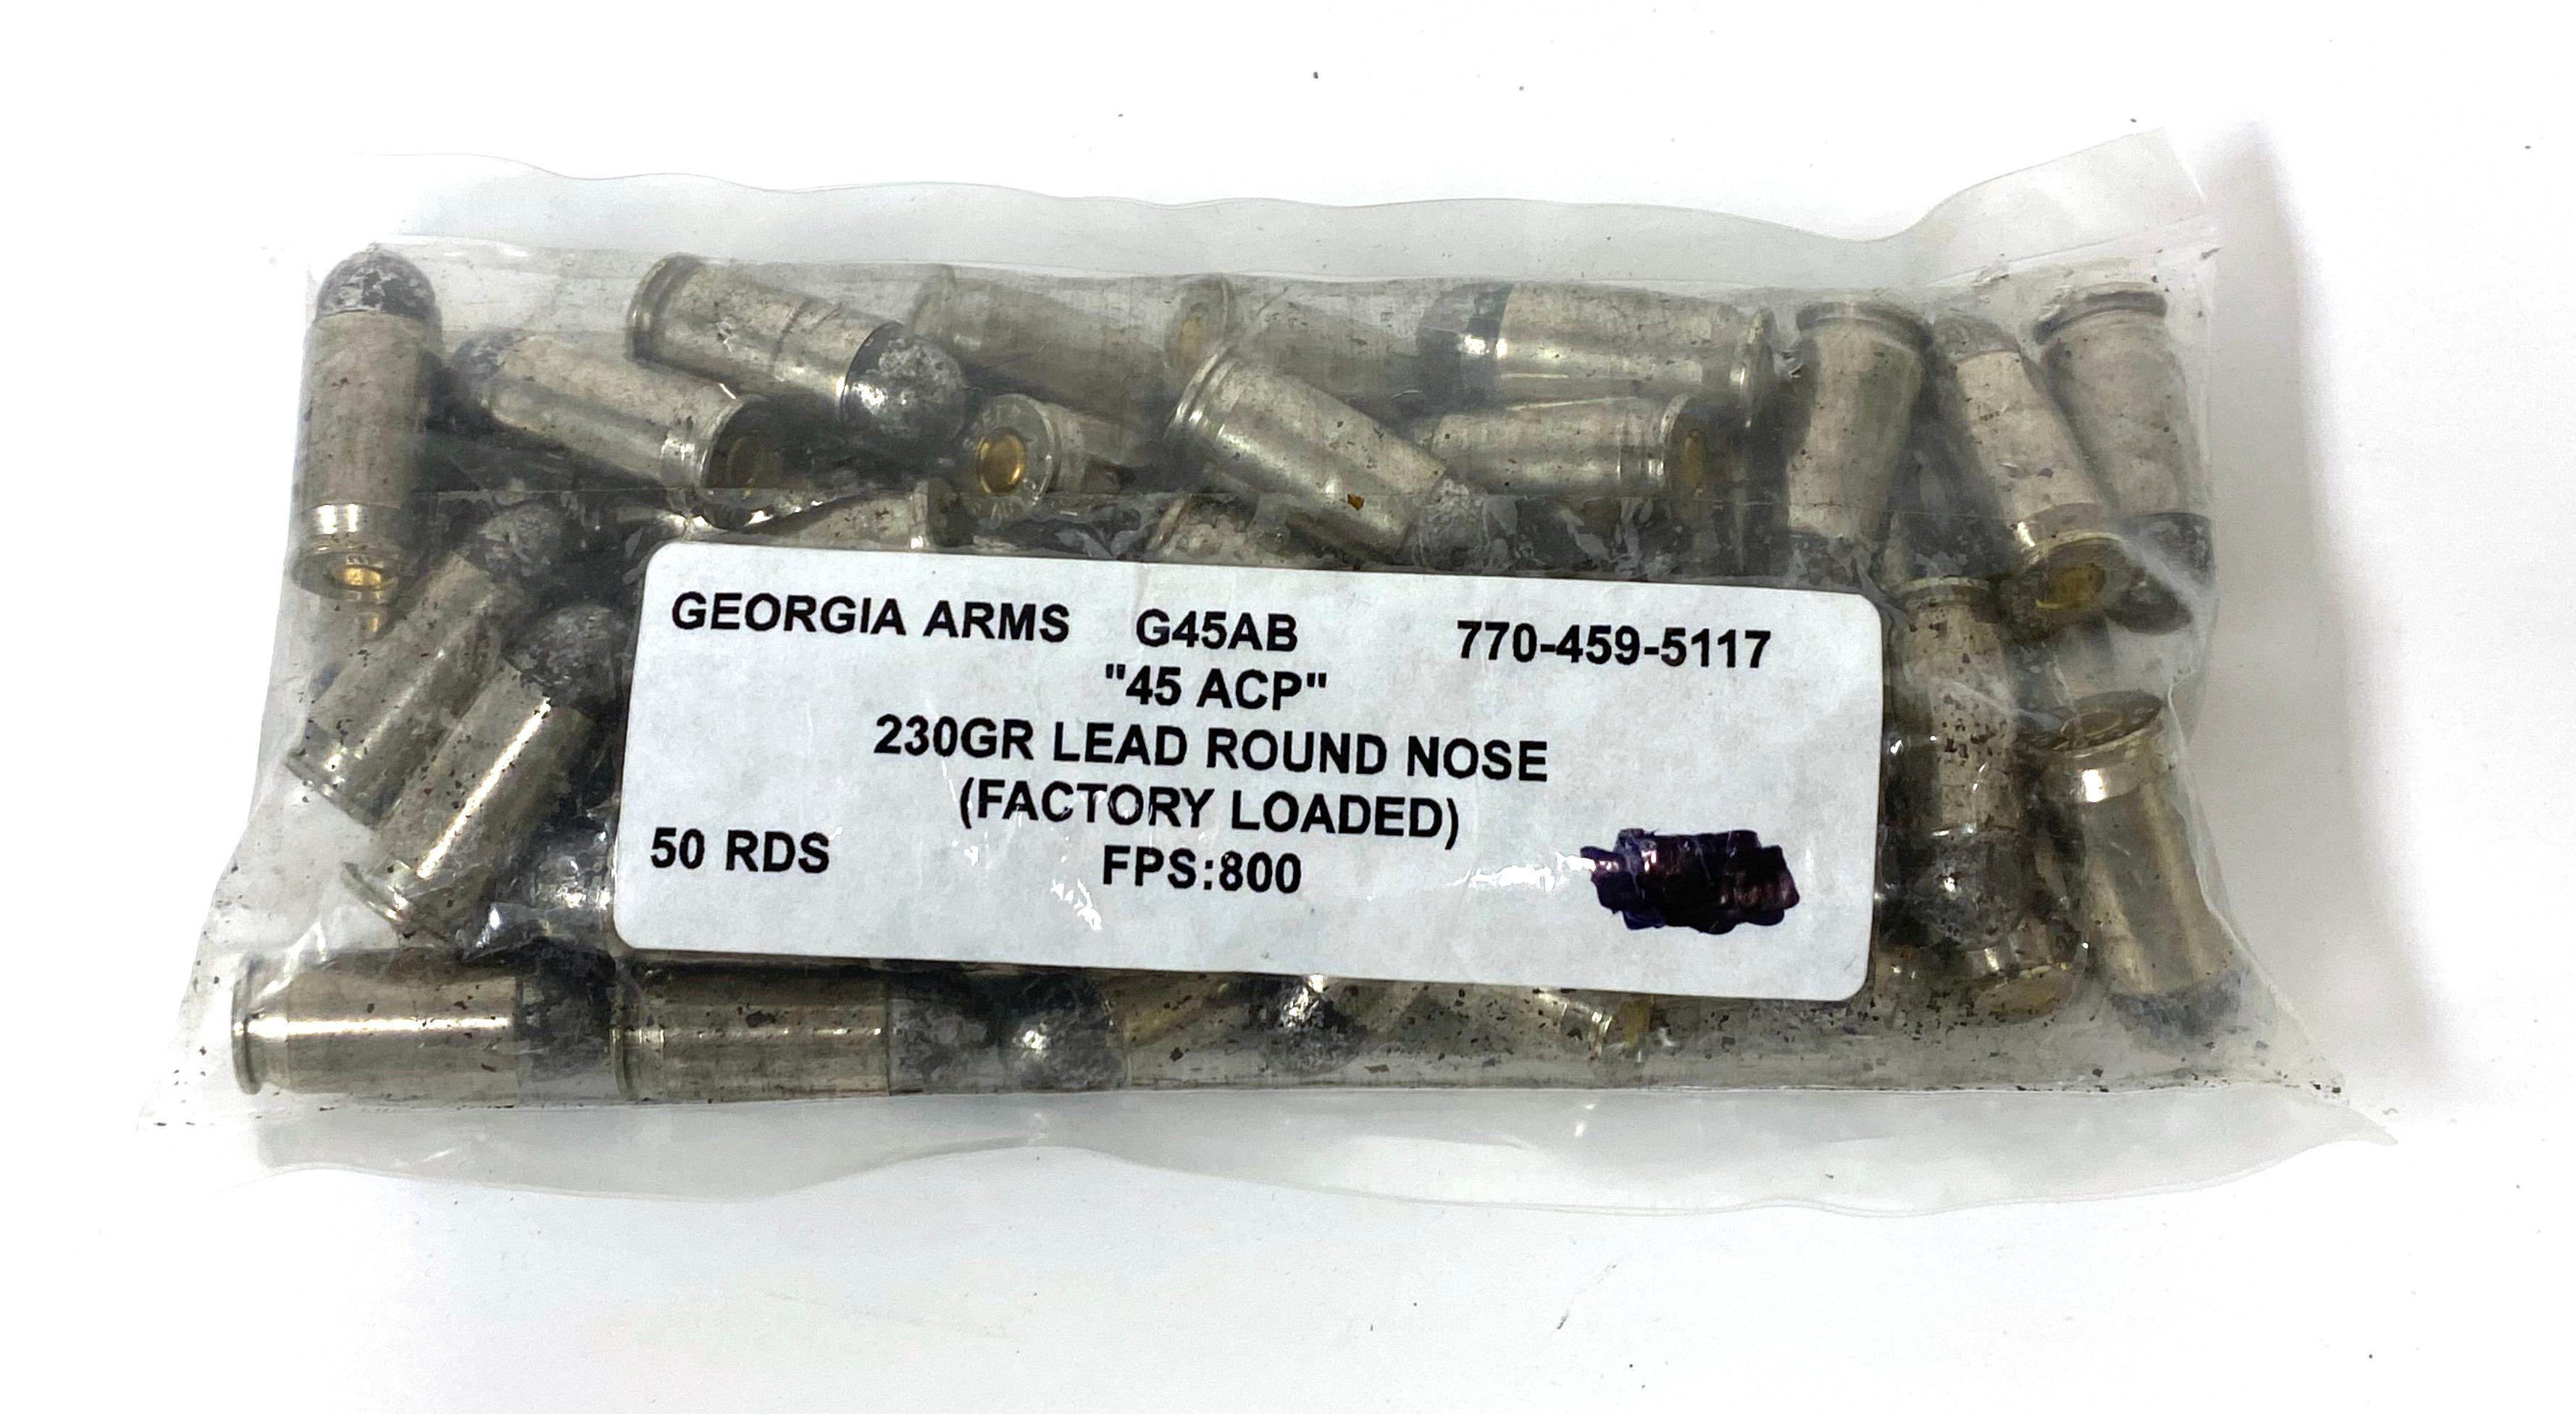 NIB 50rds. of .45 ACP 230gr. Georgia Arms (Factory Loaded) Lead Round Nose Ammunition